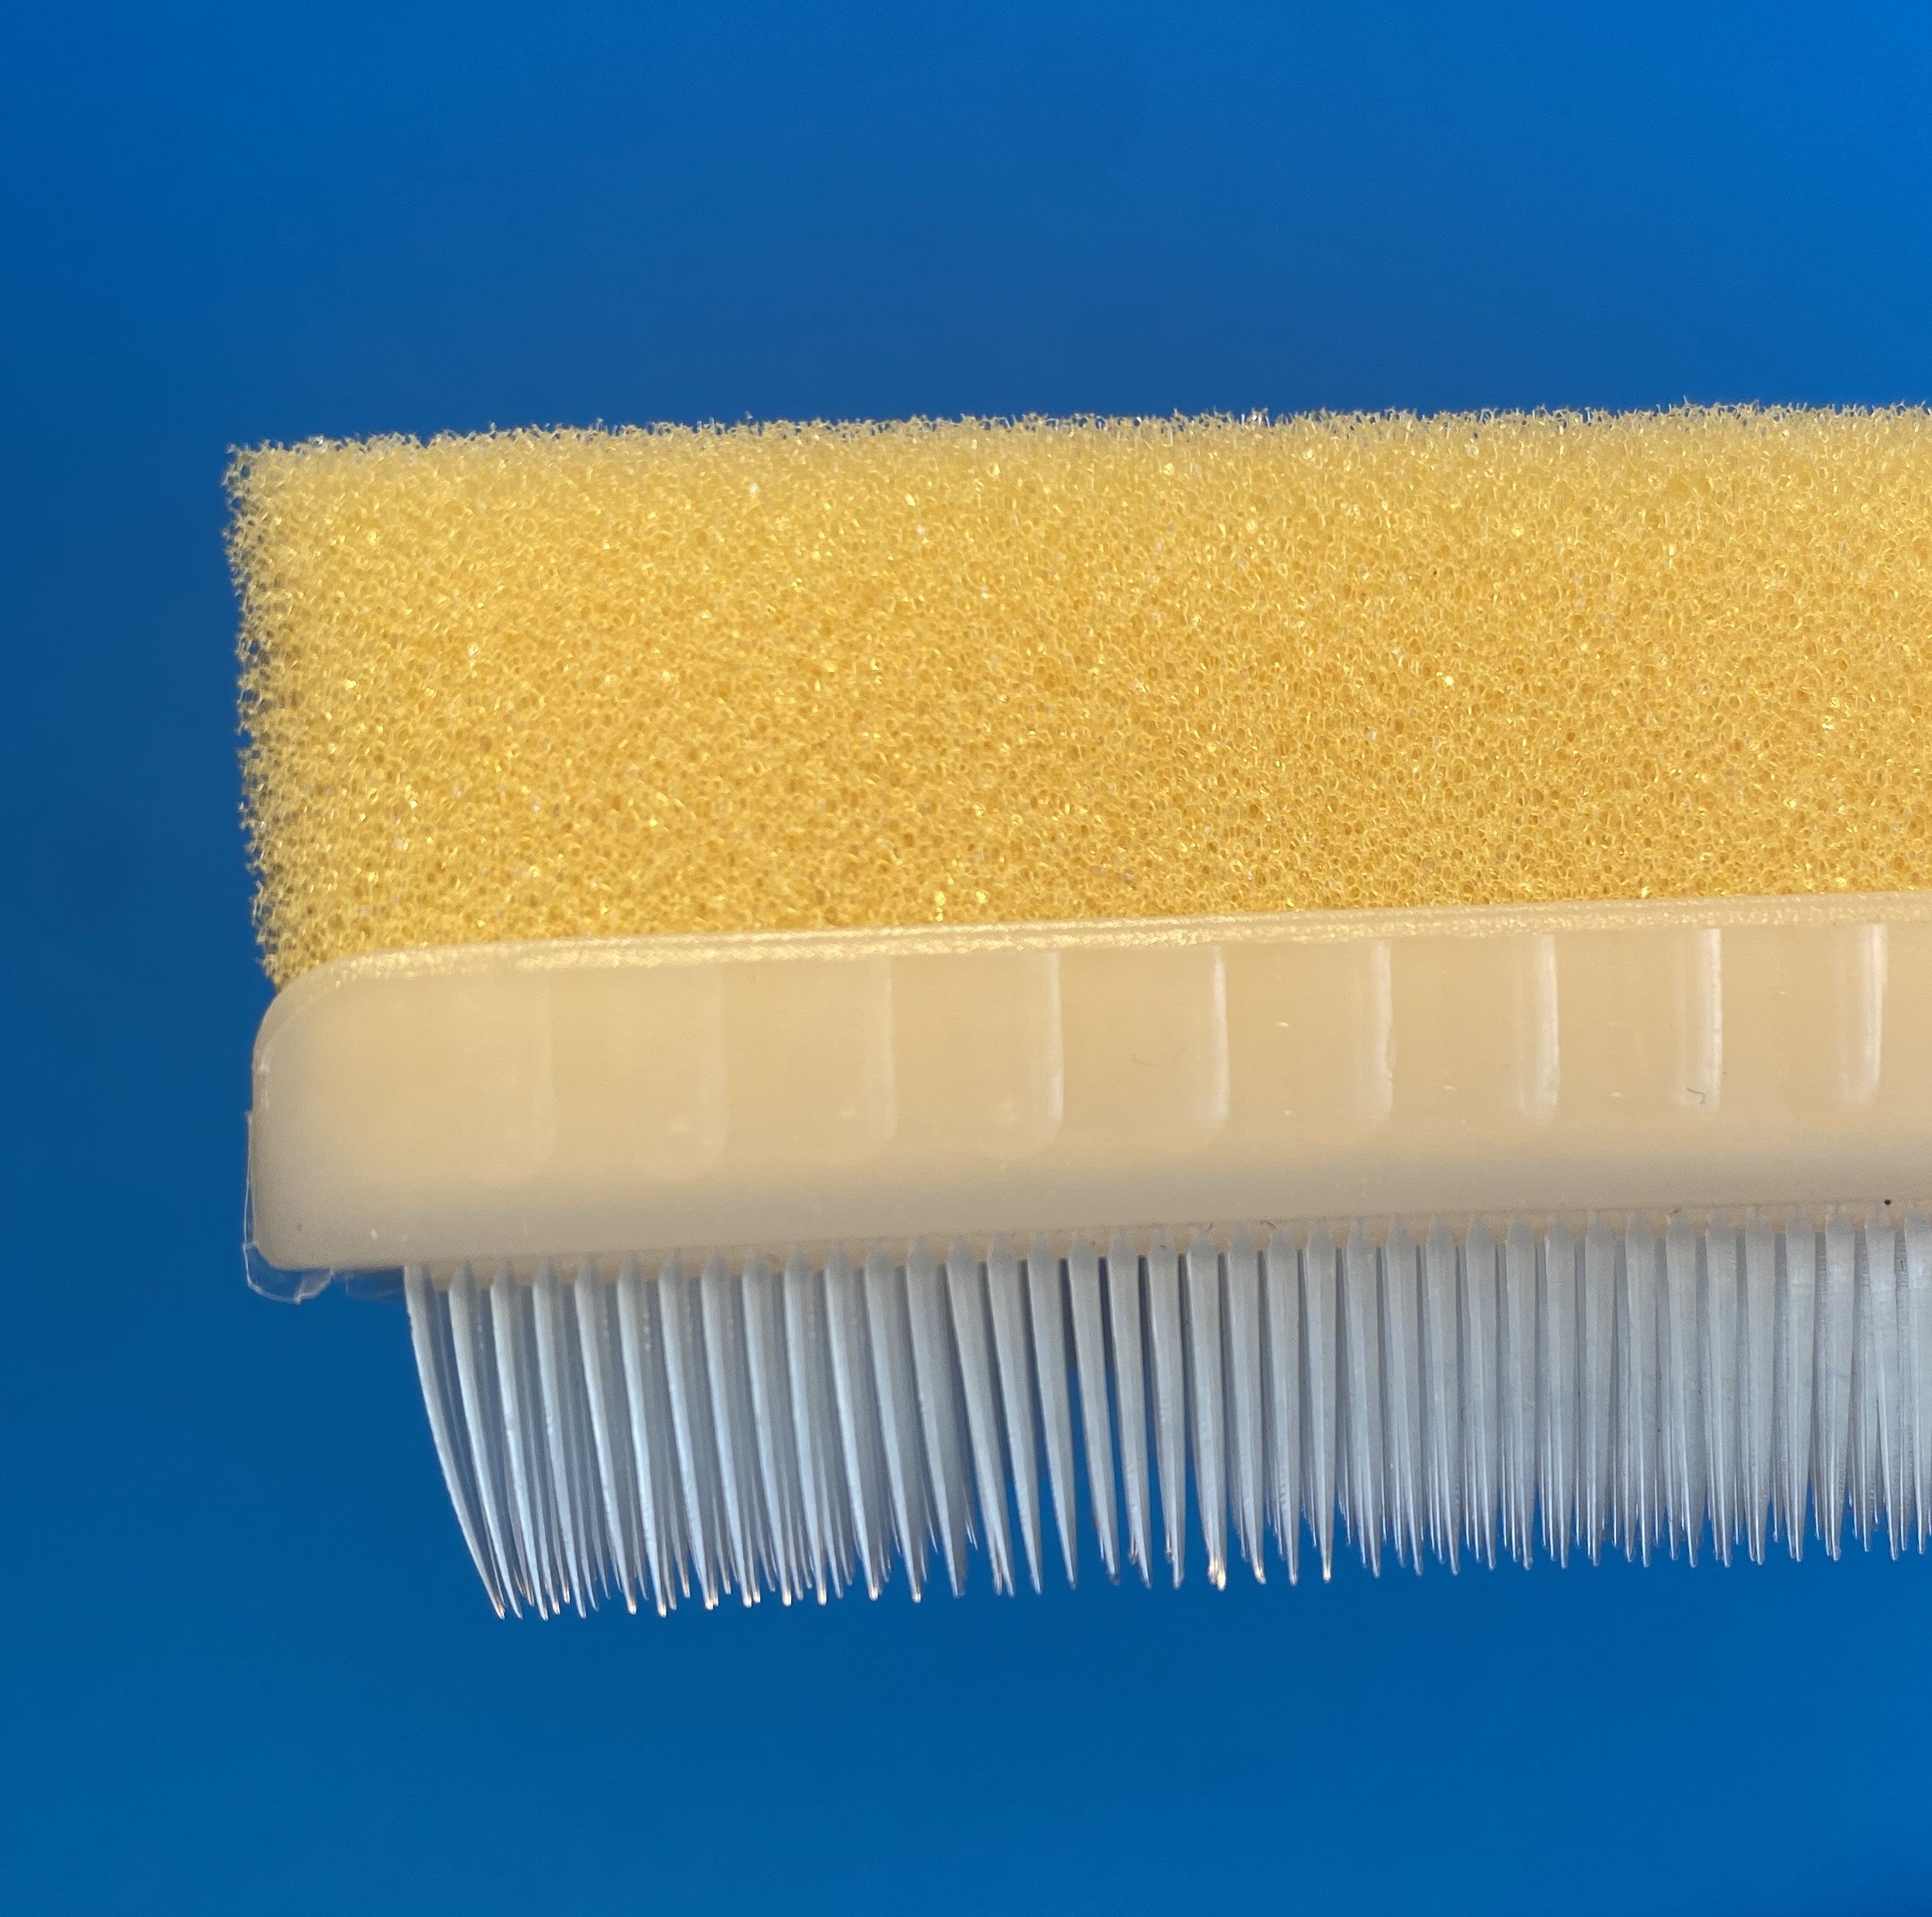 Surgical-Style Scrub Brush with Foam for Hands and Nails (box of 525 pcs)